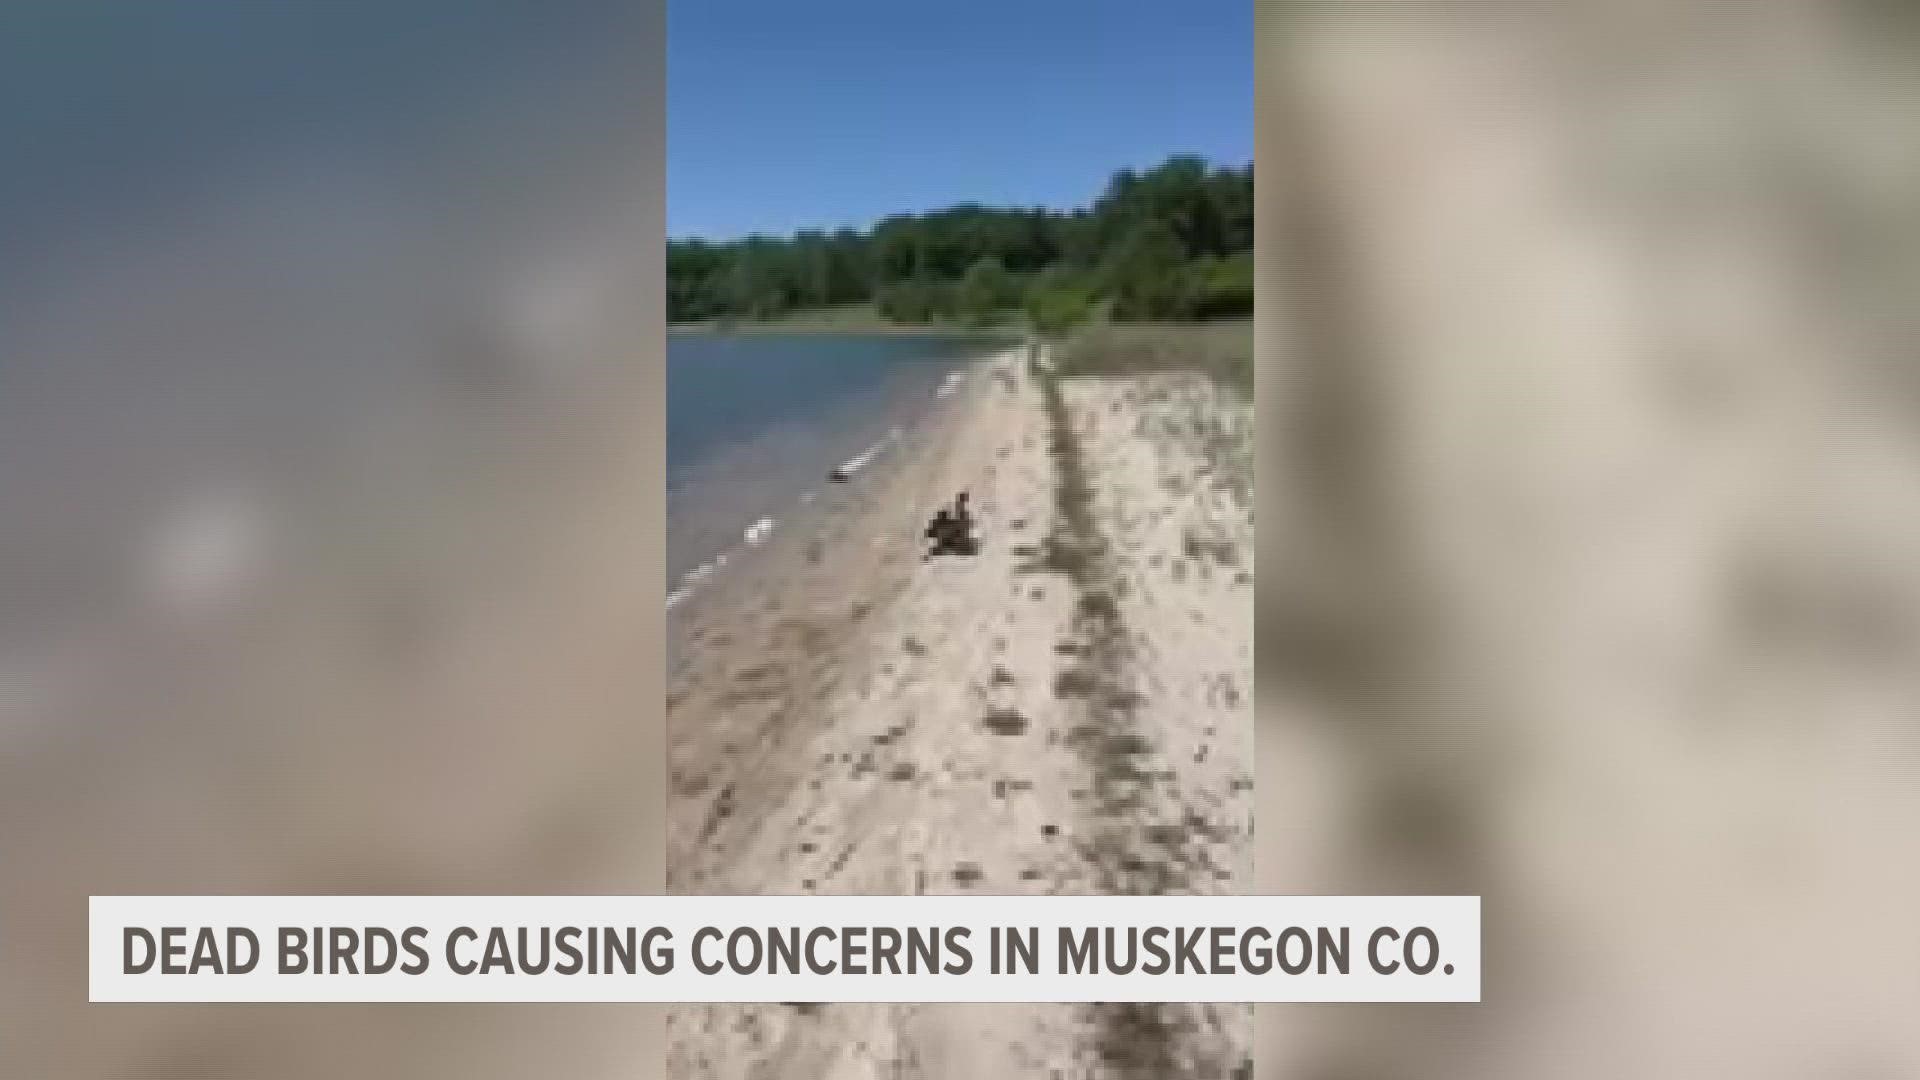 After video taping one bird, one witness said it first had a drunk walk before dying. The DNR  explains  the cause could very well be the Avian Flu.